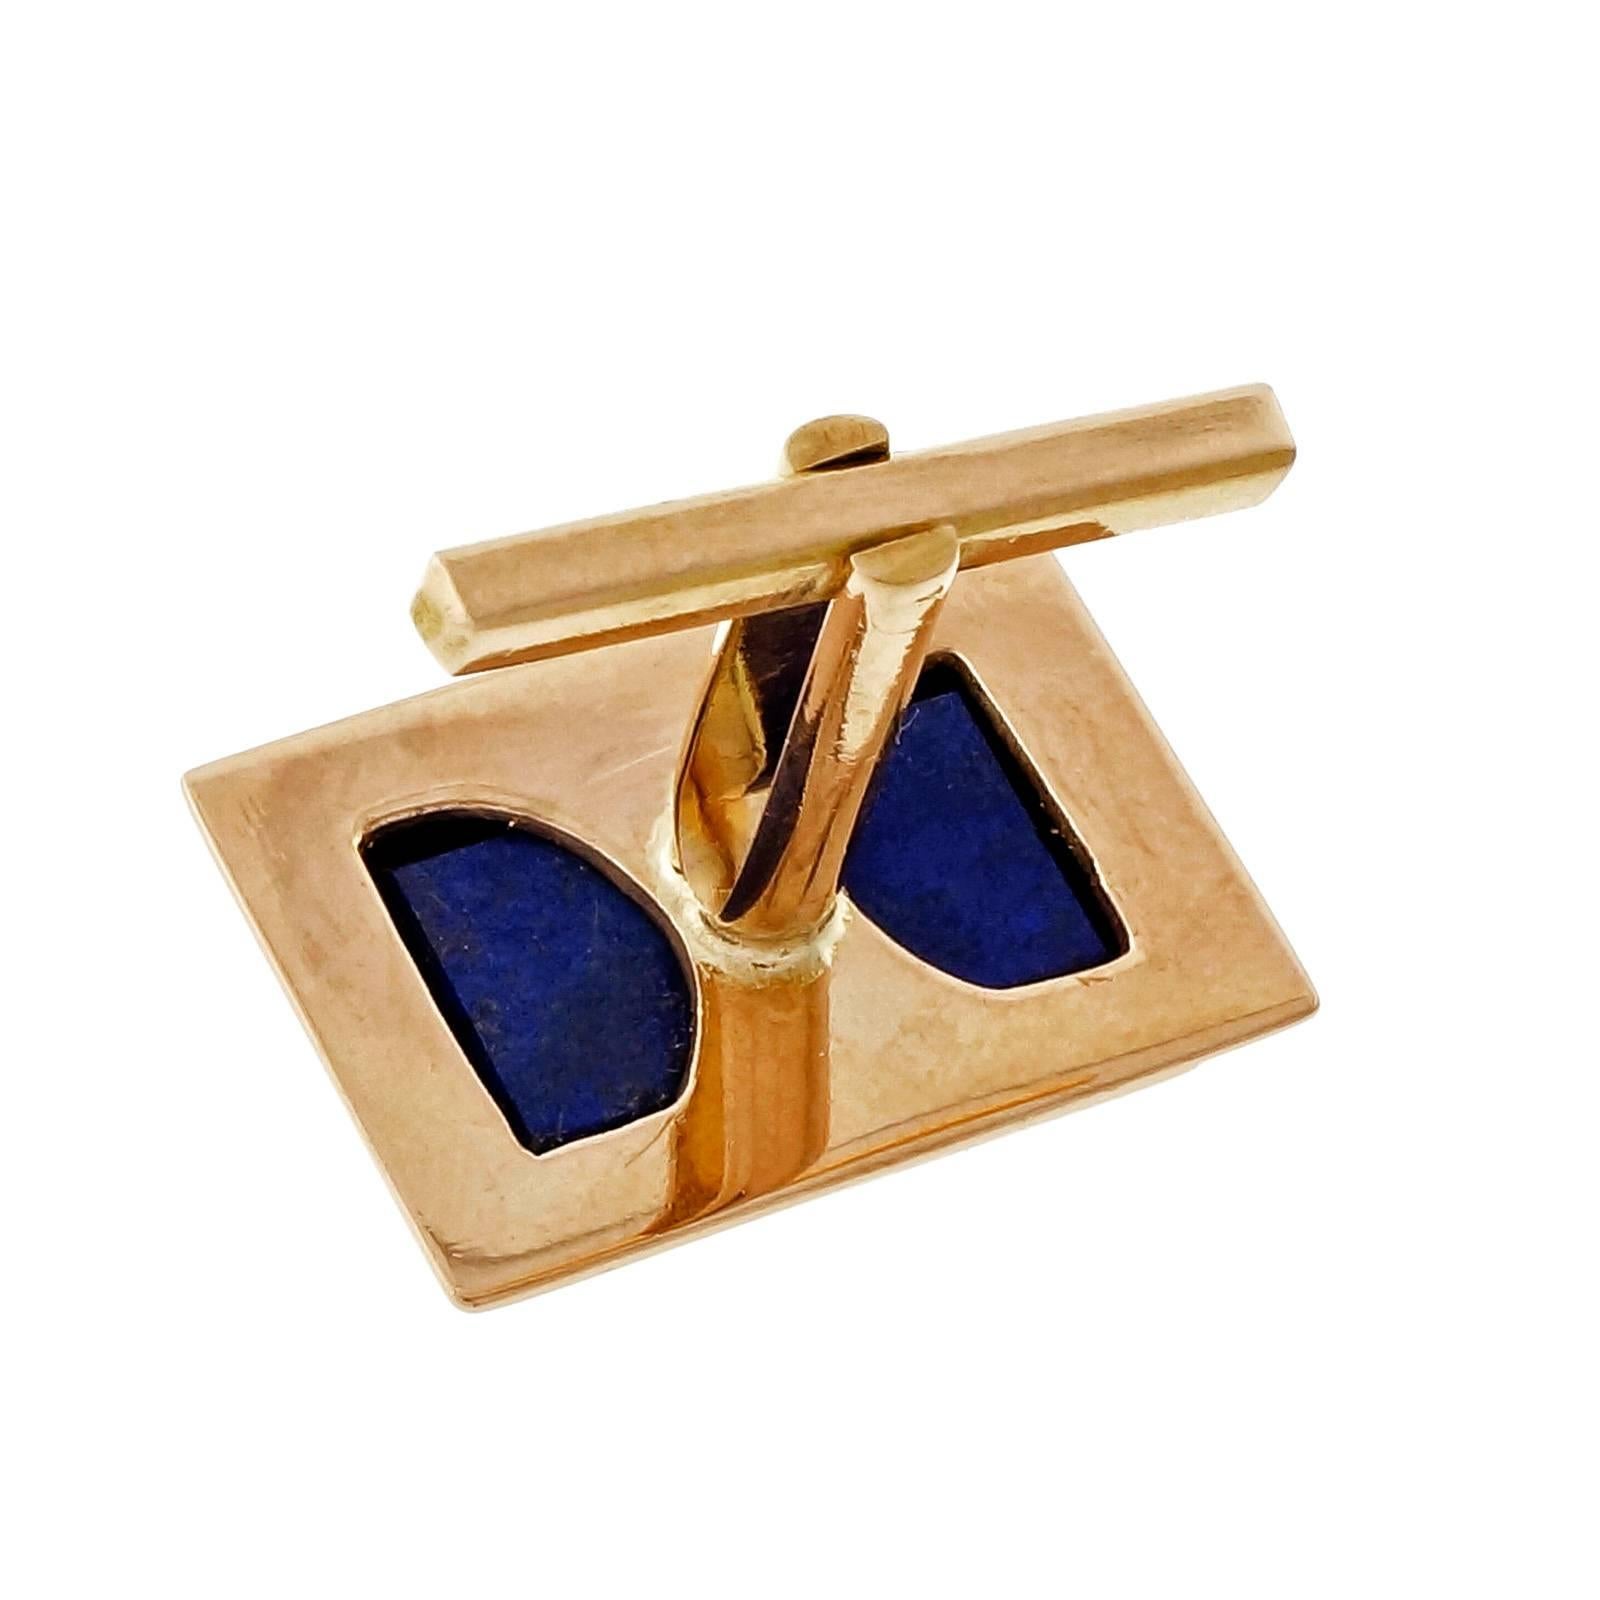 Handmade rectangular fine blue Lapis cuff links in 18k Rose gold. Circa 1940-1949.

2 rectangular pieces of blue Lapis, 10.48 x 15.58 x 3.34mm
18k rose gold
Top to bottom: 14.66mm or .57 inch
Width: 19.91mm or .78 inch
Depth: 4mm
12.3 grams
